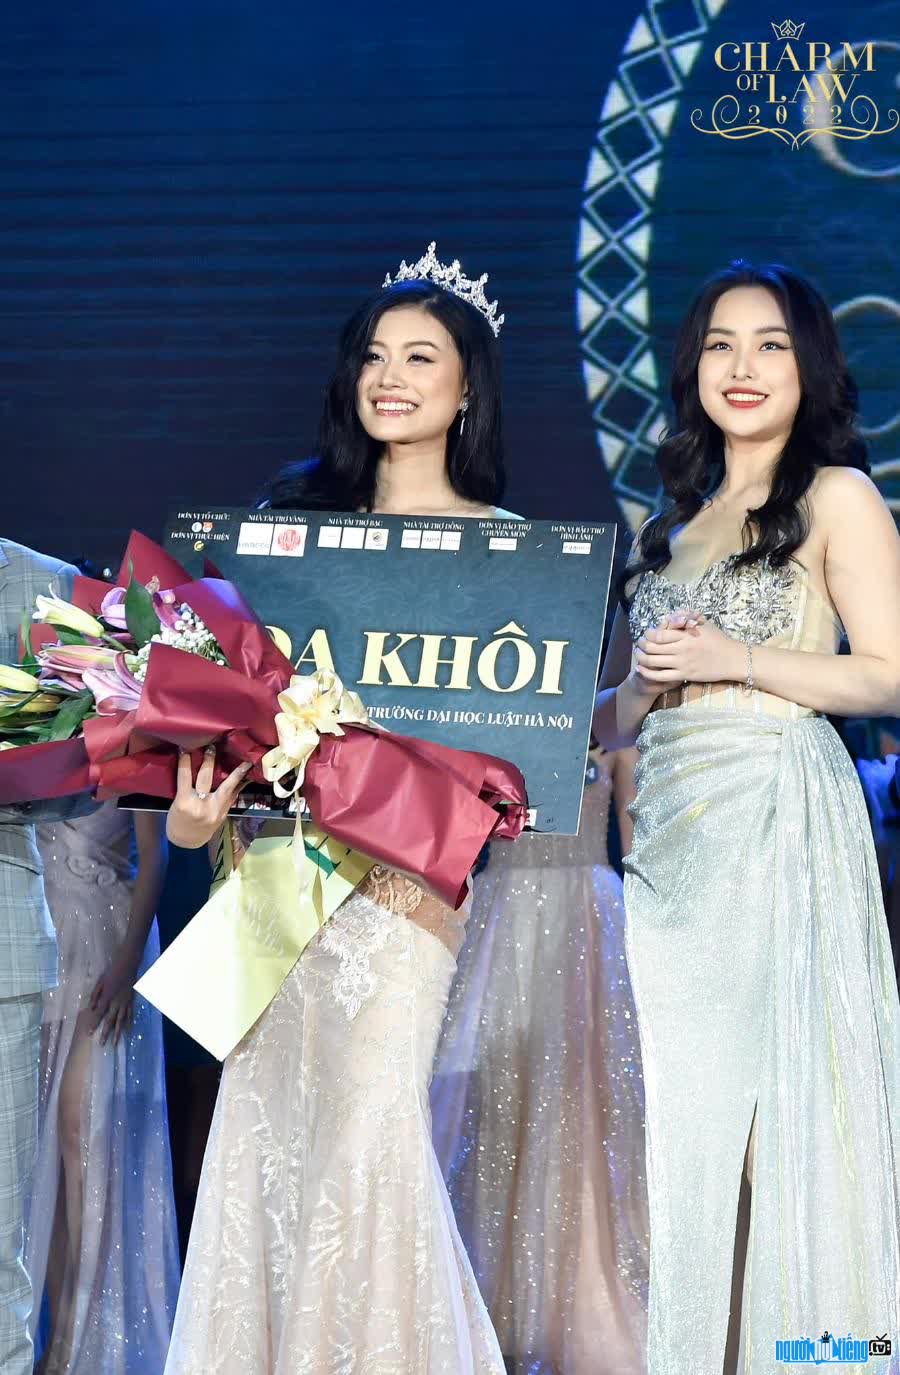 Ha Phuong won the Miss contest "Charm of Law 2022"